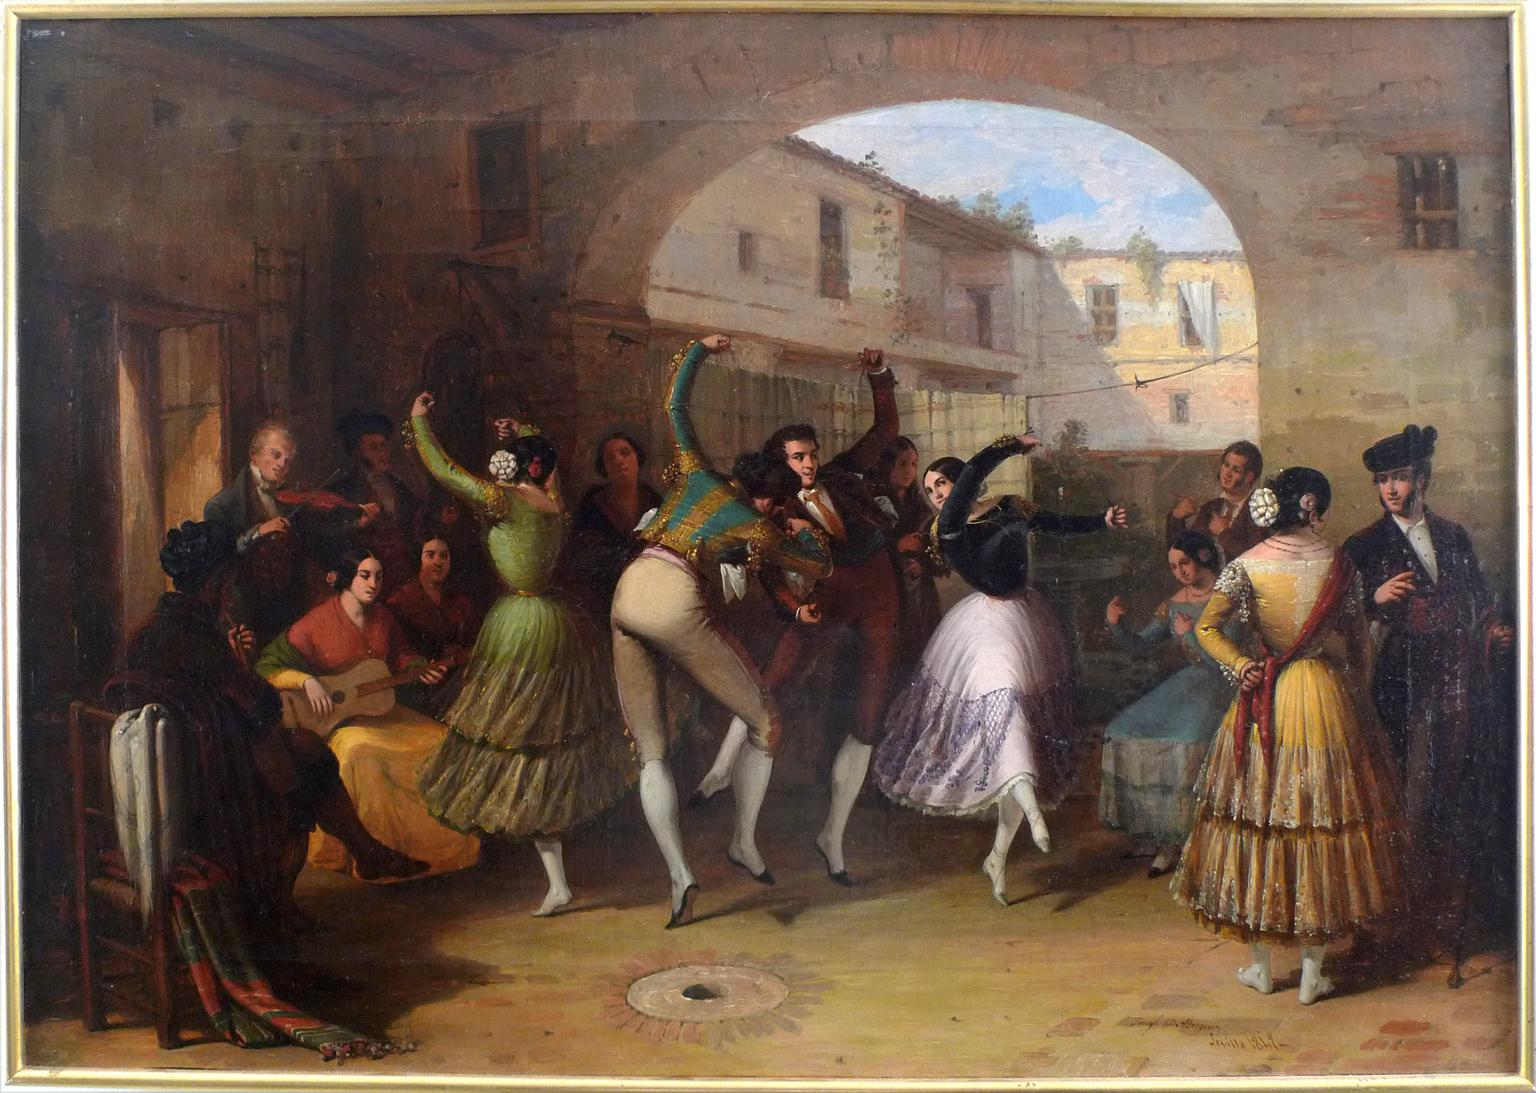 "Dancers in a Courtyard",  19th Century Oil on Canvas by Joaq. Domínguez Bécquer